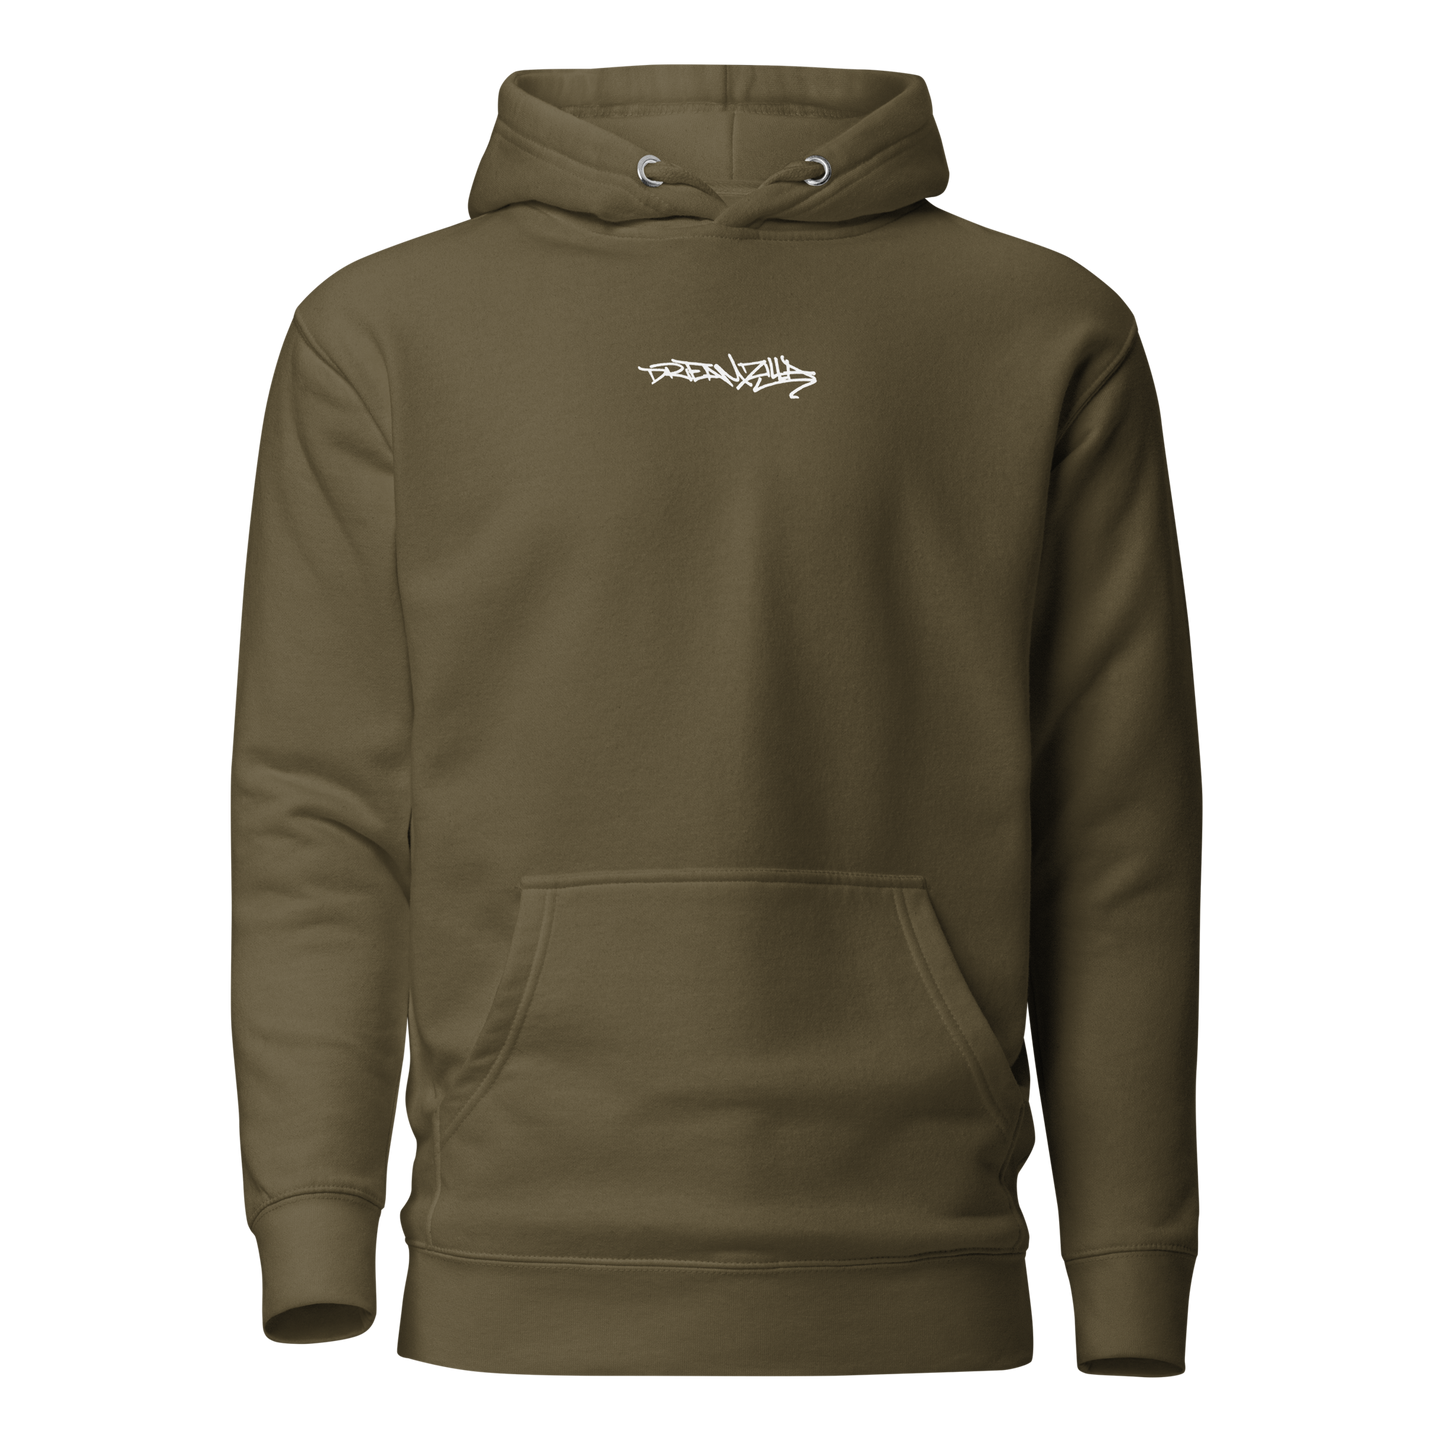 Graffiti Tag+Wildstyle by Sanitor Unisex Hoodie in Military Green